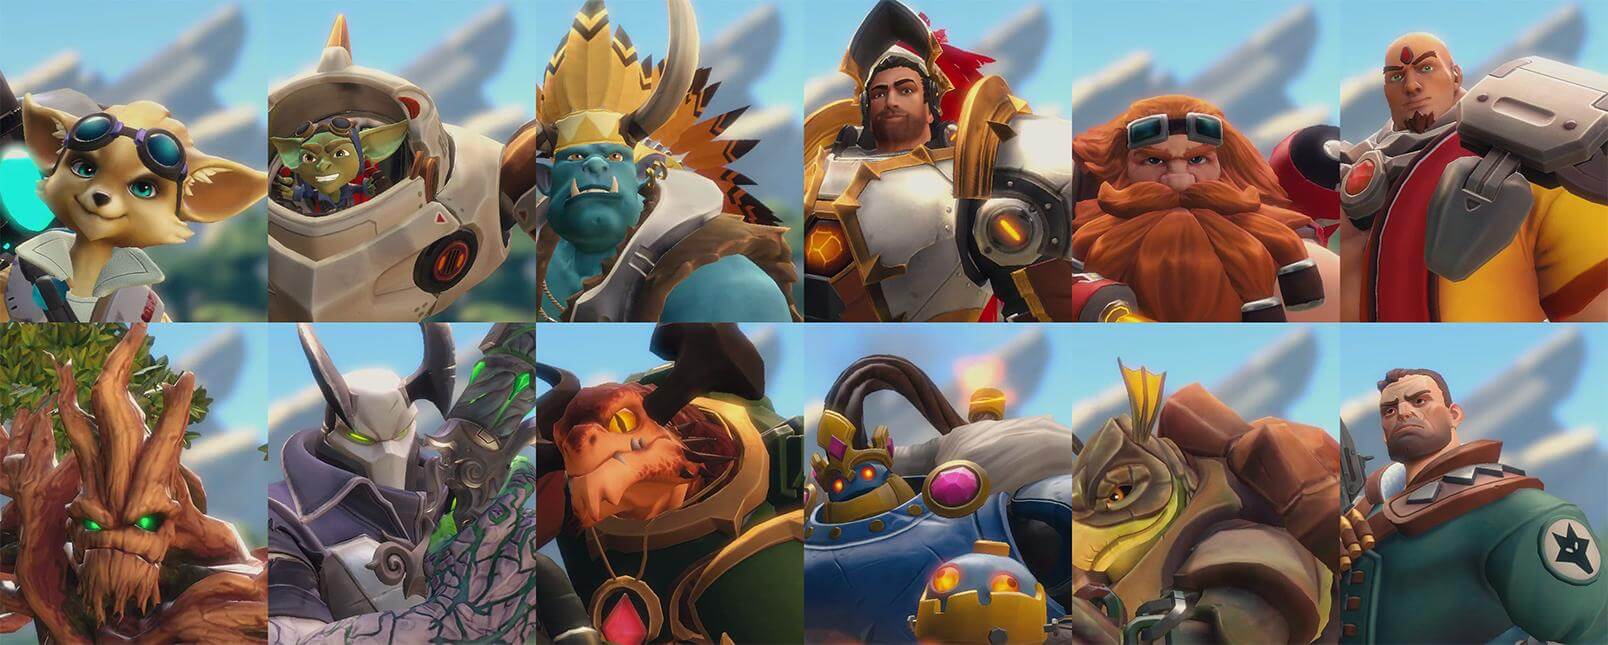 overwatch vs paladins Characters Comparison